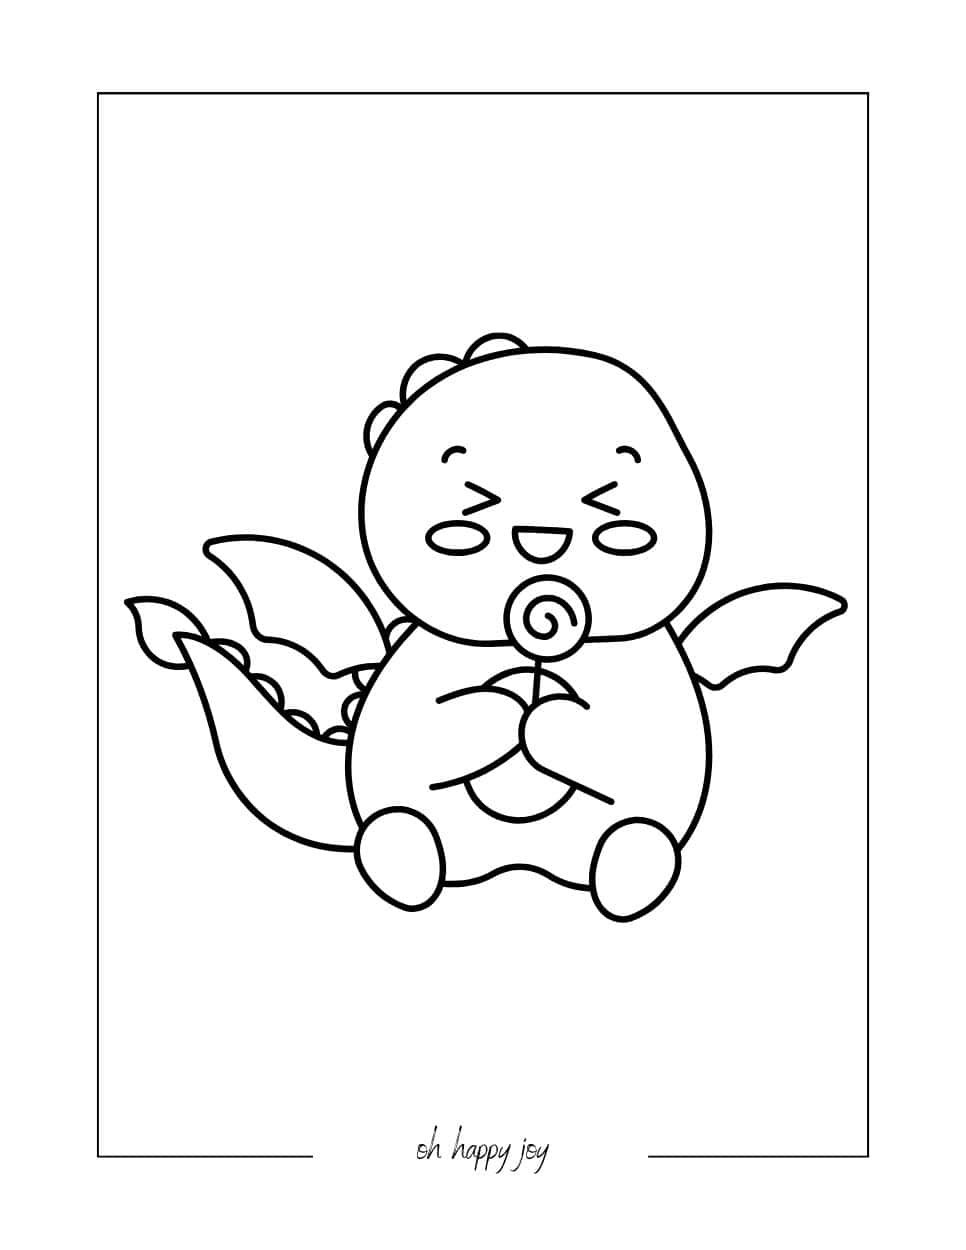 Dragon and Lollipop Coloring Page